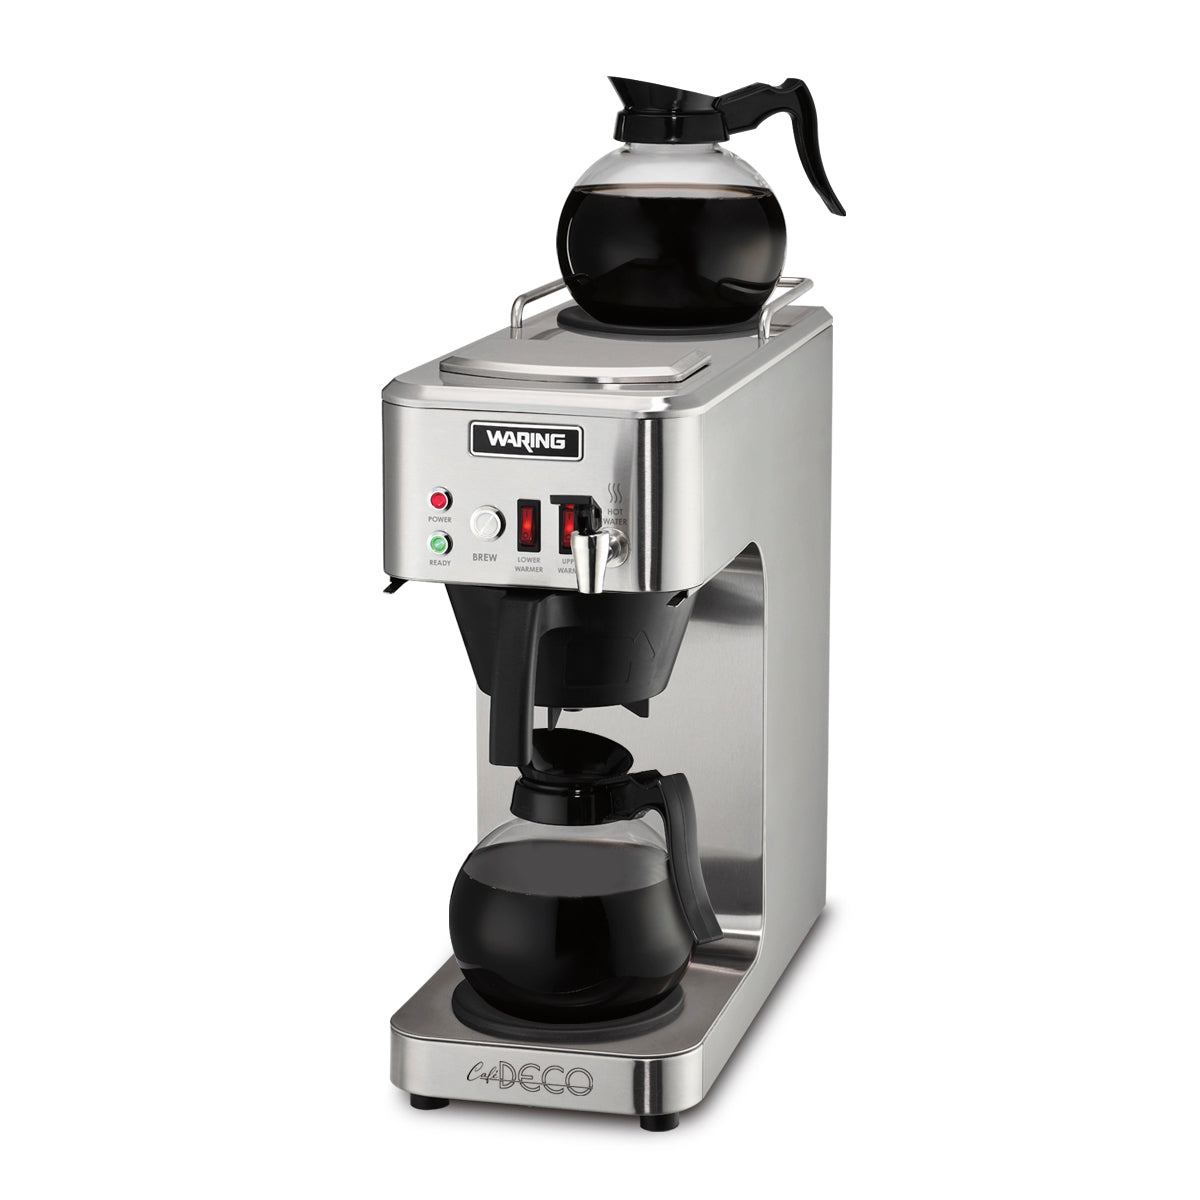 WCM50P "Café Deco" Automatic Coffee Brewer with Two Warmers & Hot Water Faucet by Waring Commercial